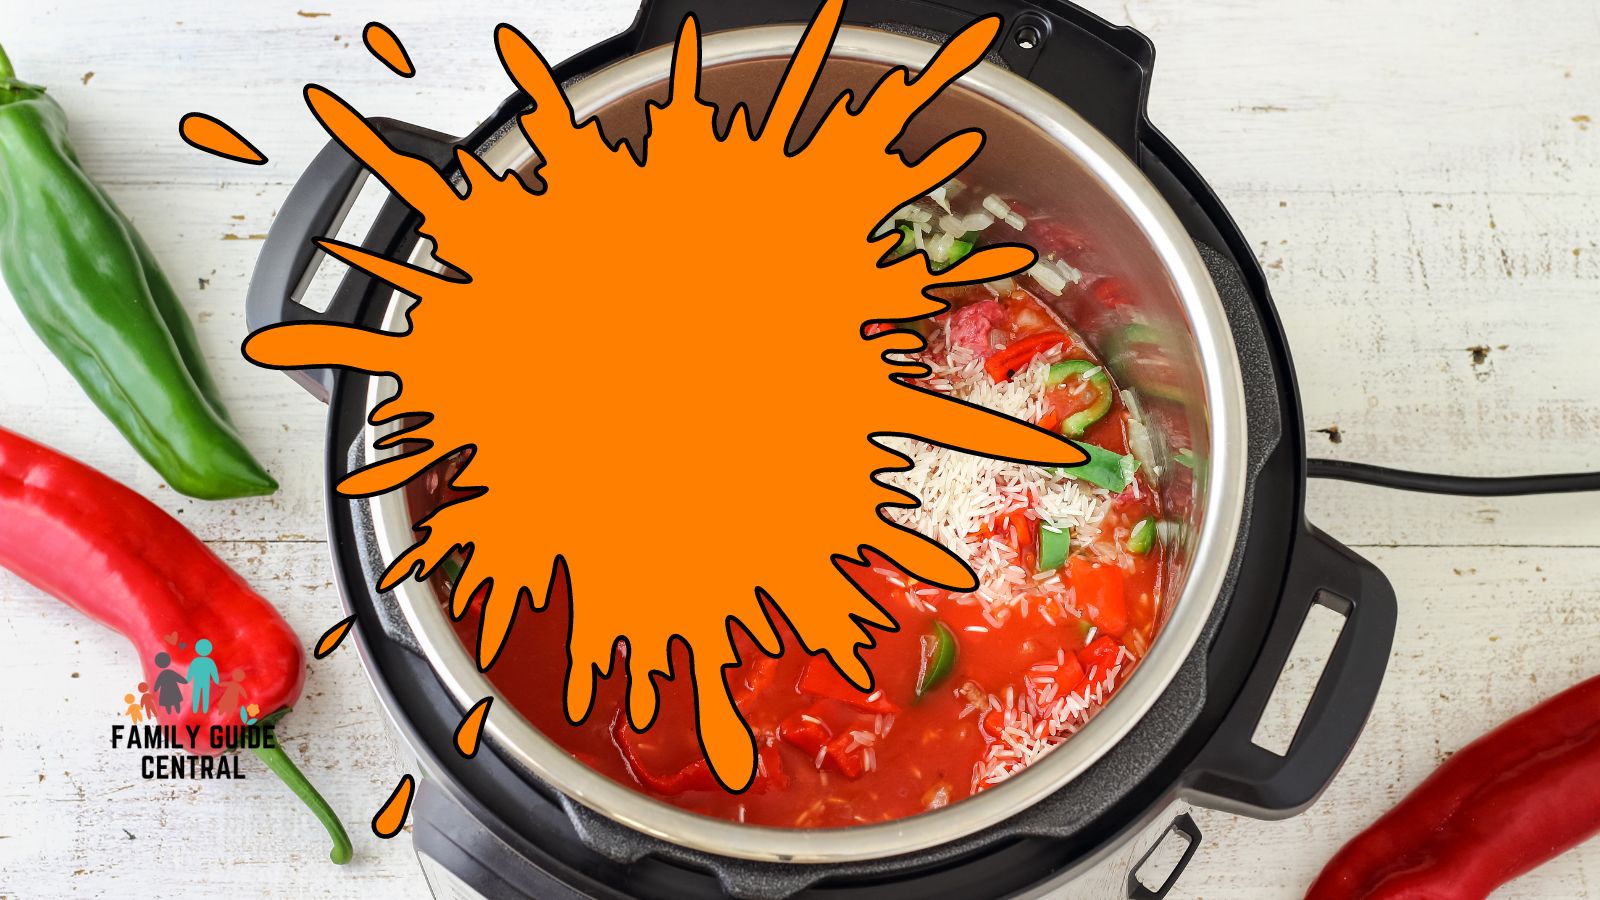 Slow cooker explosion - familyguidecentral.com